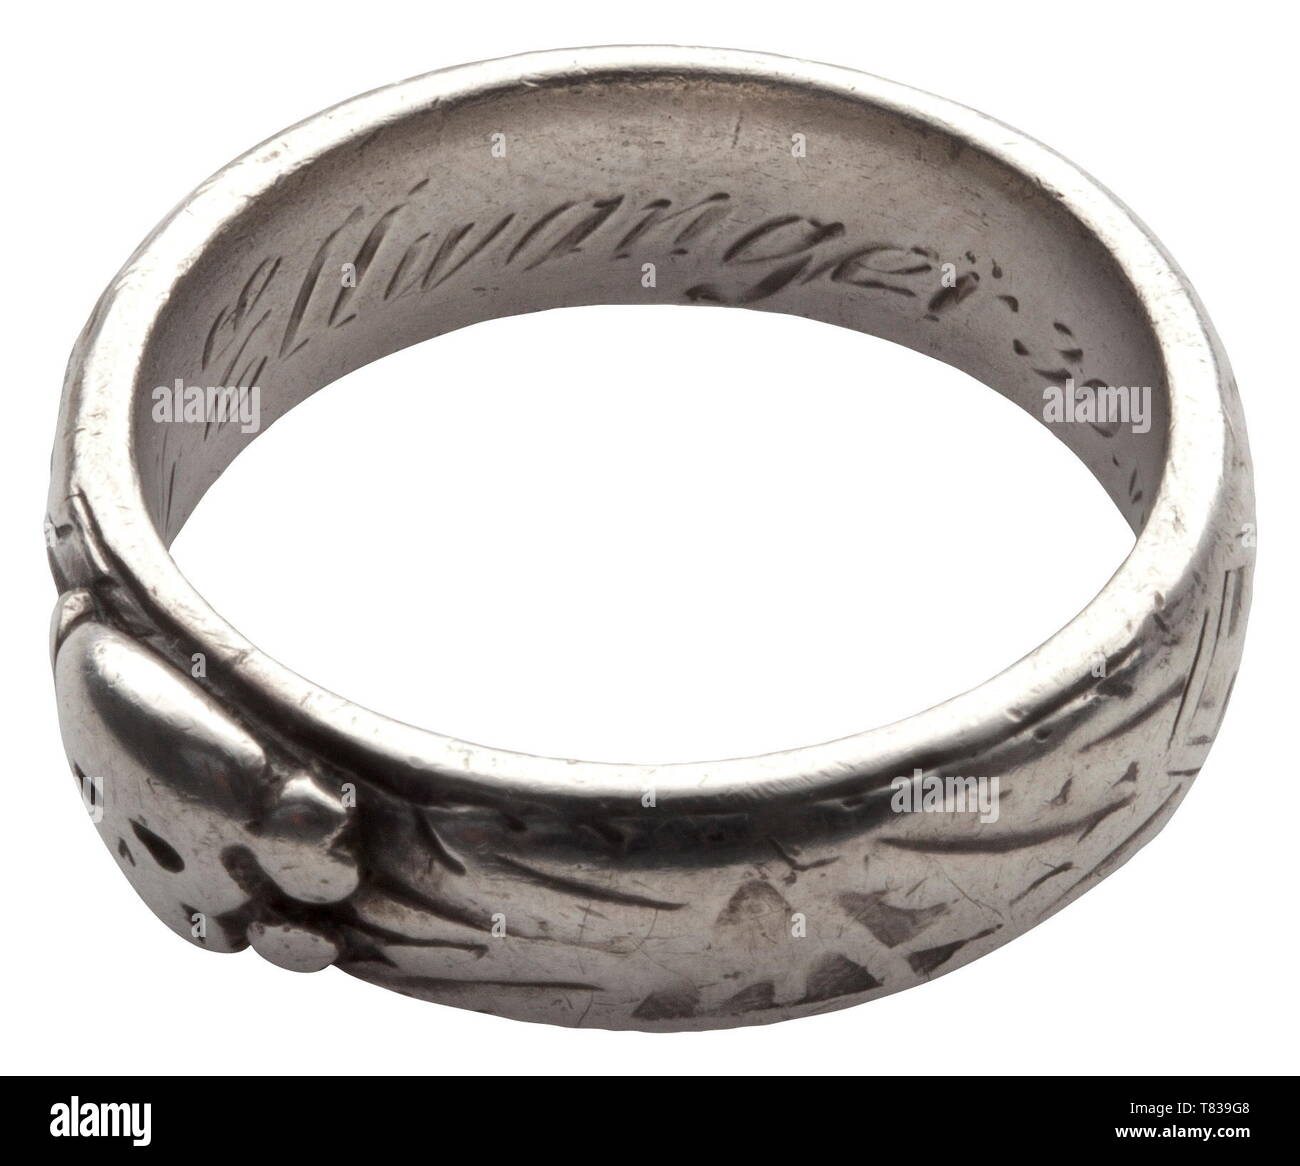 An SS honour ring custom-made by the jeweller Gahr in Munich, soldered underneath the separately applied death's head, the inside surface with engraved dedication 'S.lb. Ellwanger 30.VI.34 H. Himmler'. Weight 9.7 grammes, inside diameter 20 mm, heavily used. The ring comes from family possession and has never been in collectorsÂ´ hands before. historic, historical, 20th century, 1930s, 1940s, Waffen-SS, armed division of the SS, armed service, armed services, NS, National Socialism, Nazism, Third Reich, German Reich, Germany, military, militaria, utensil, piece of equipment, Editorial-Use-Only Stock Photo